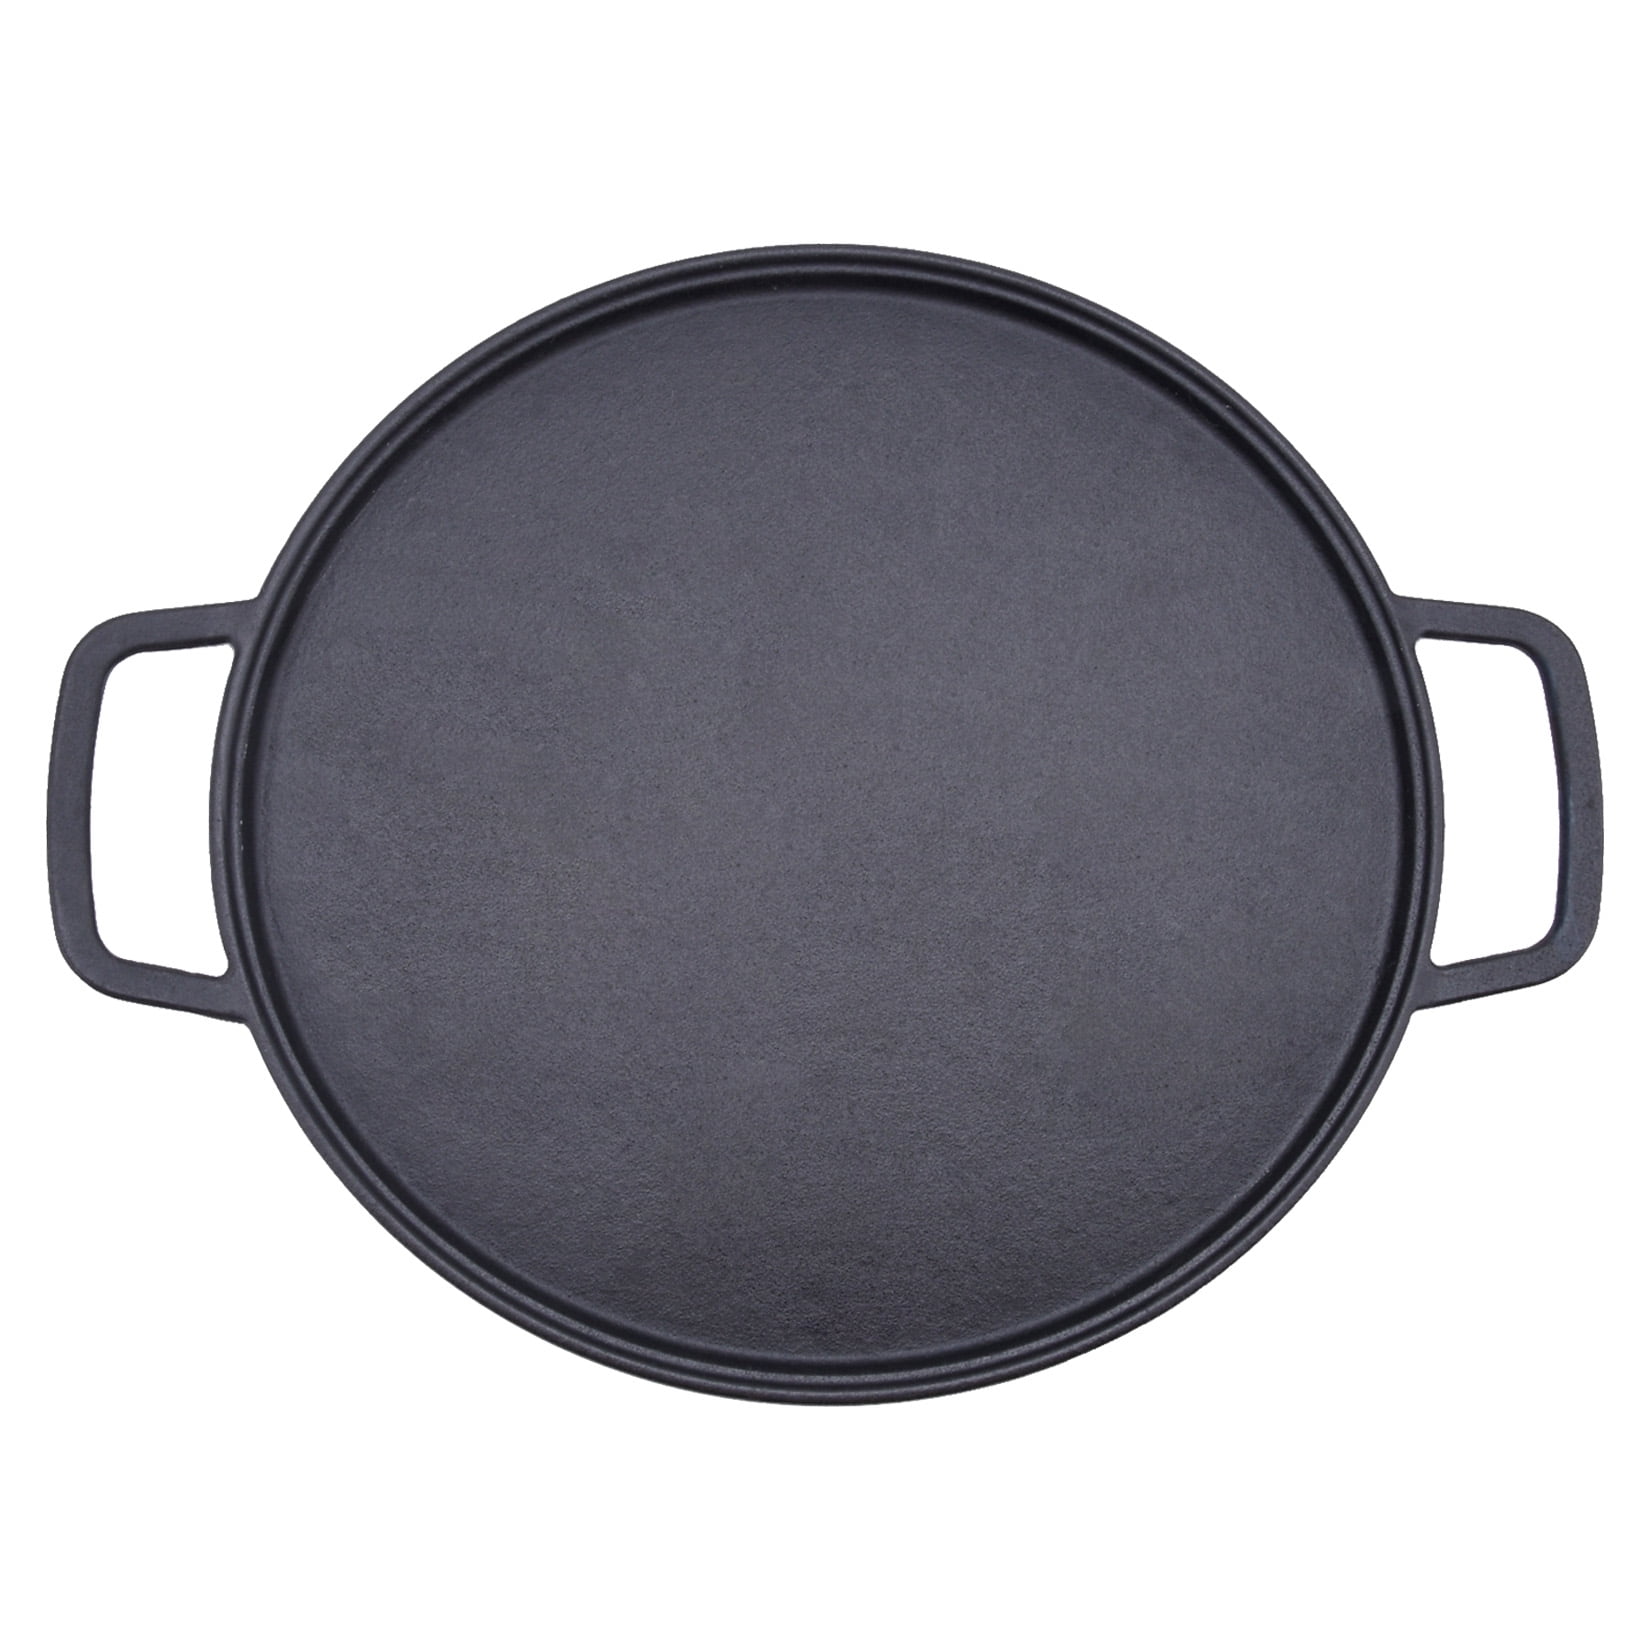 1-Piece 16.50 Inch Cast Iron Griddle Plate | Reversible Pre-Seasoned Cast  Iron Grill Pan for Gas Stovetop | Double Sided Used on Open Fire & in Oven  